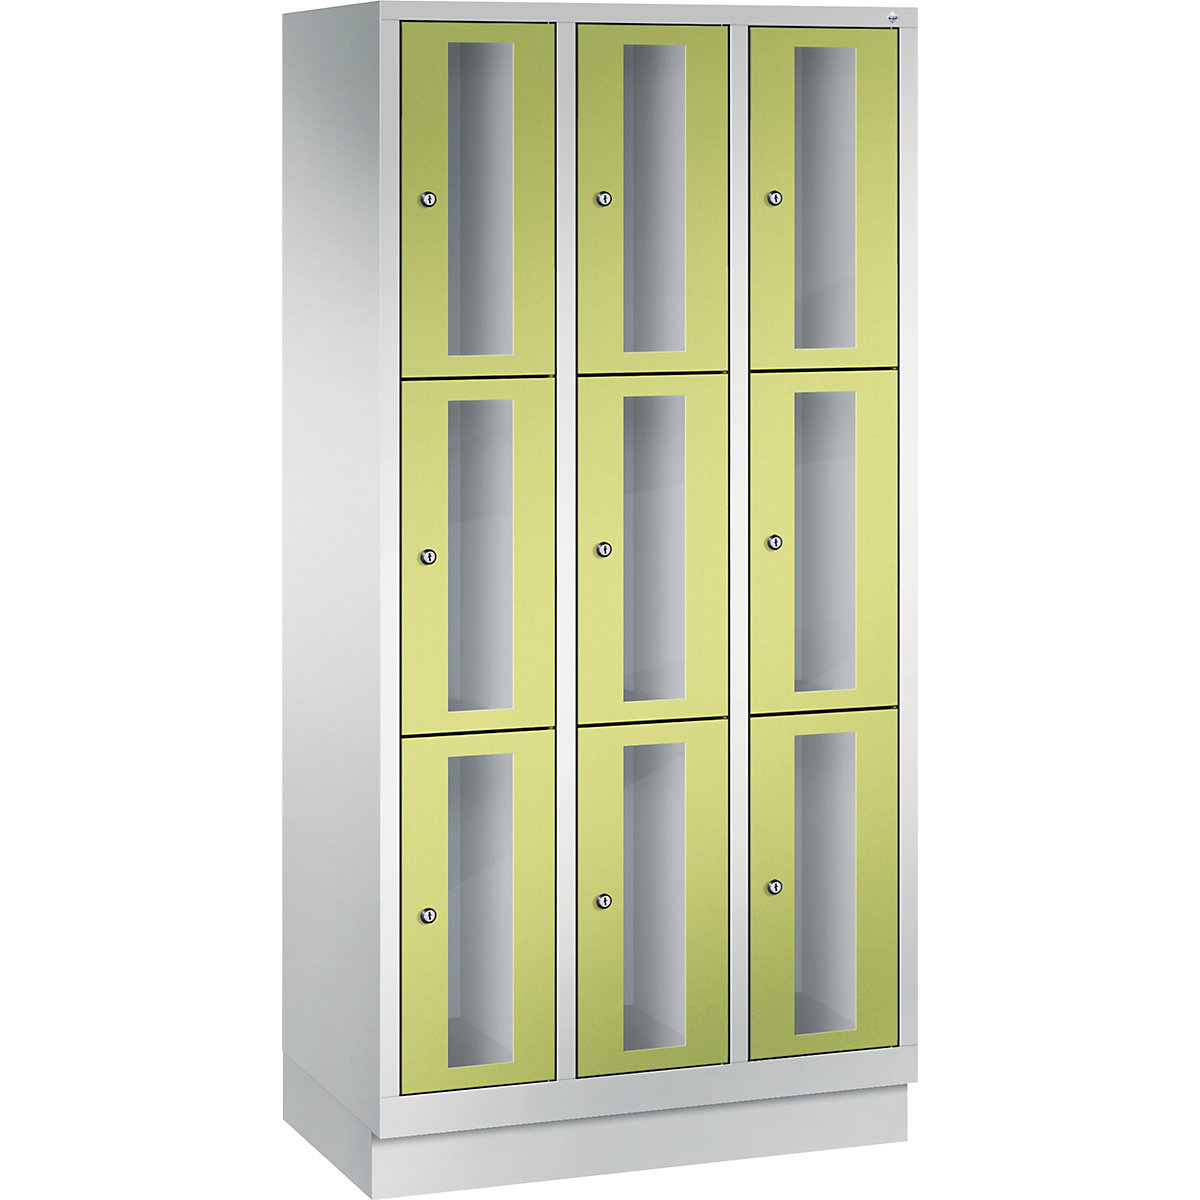 C+P – CLASSIC locker unit, compartment height 510 mm, with plinth, 9 compartments, width 900 mm, viridian green door